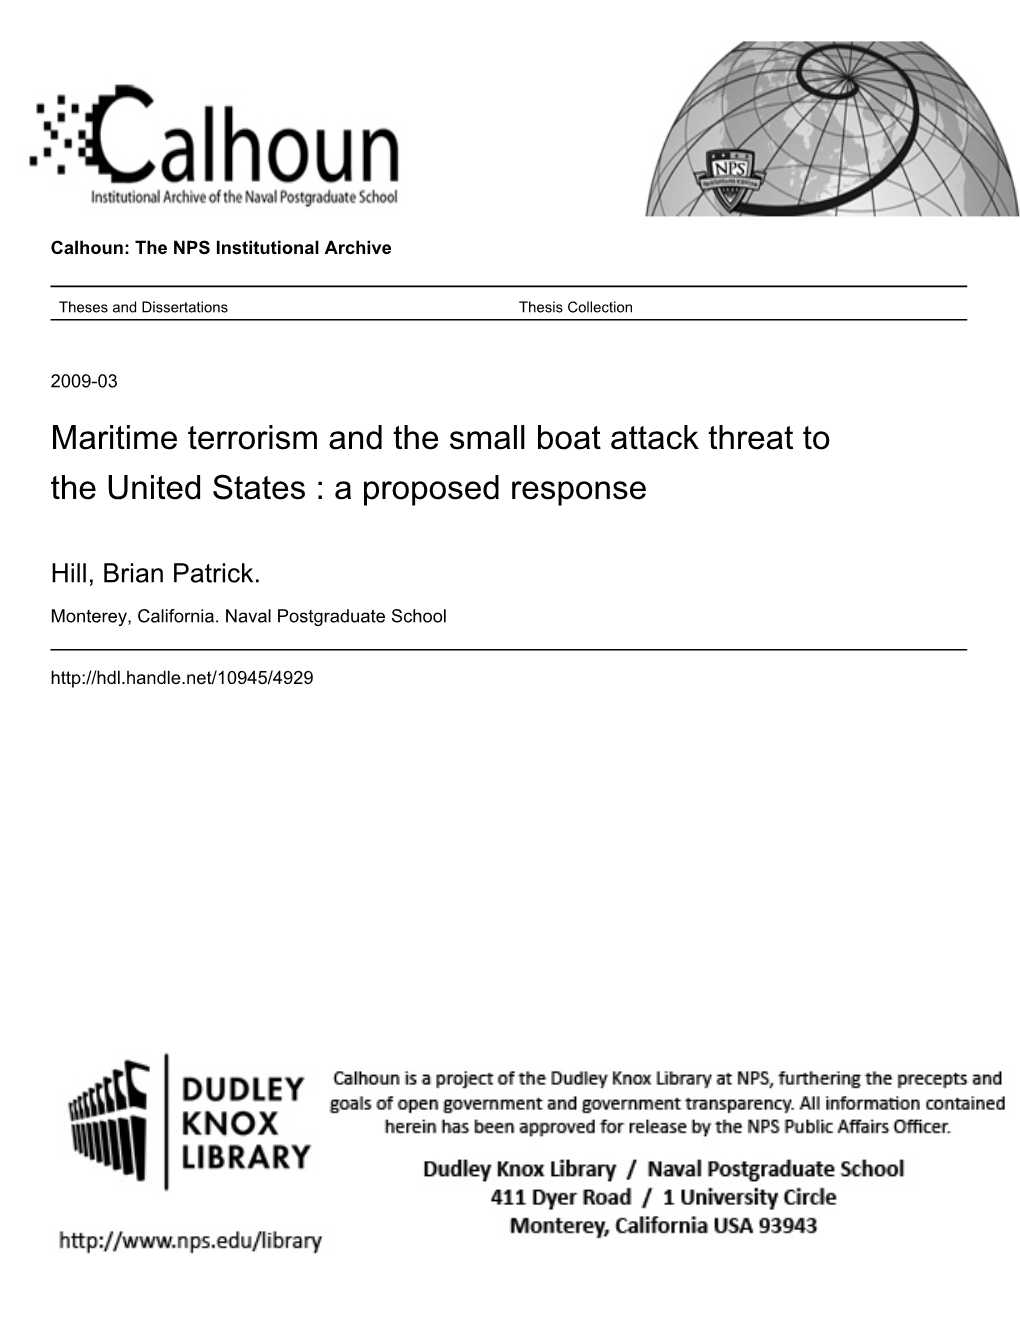 Maritime Terrorism and the Small Boat Attack Threat to the United States : a Proposed Response